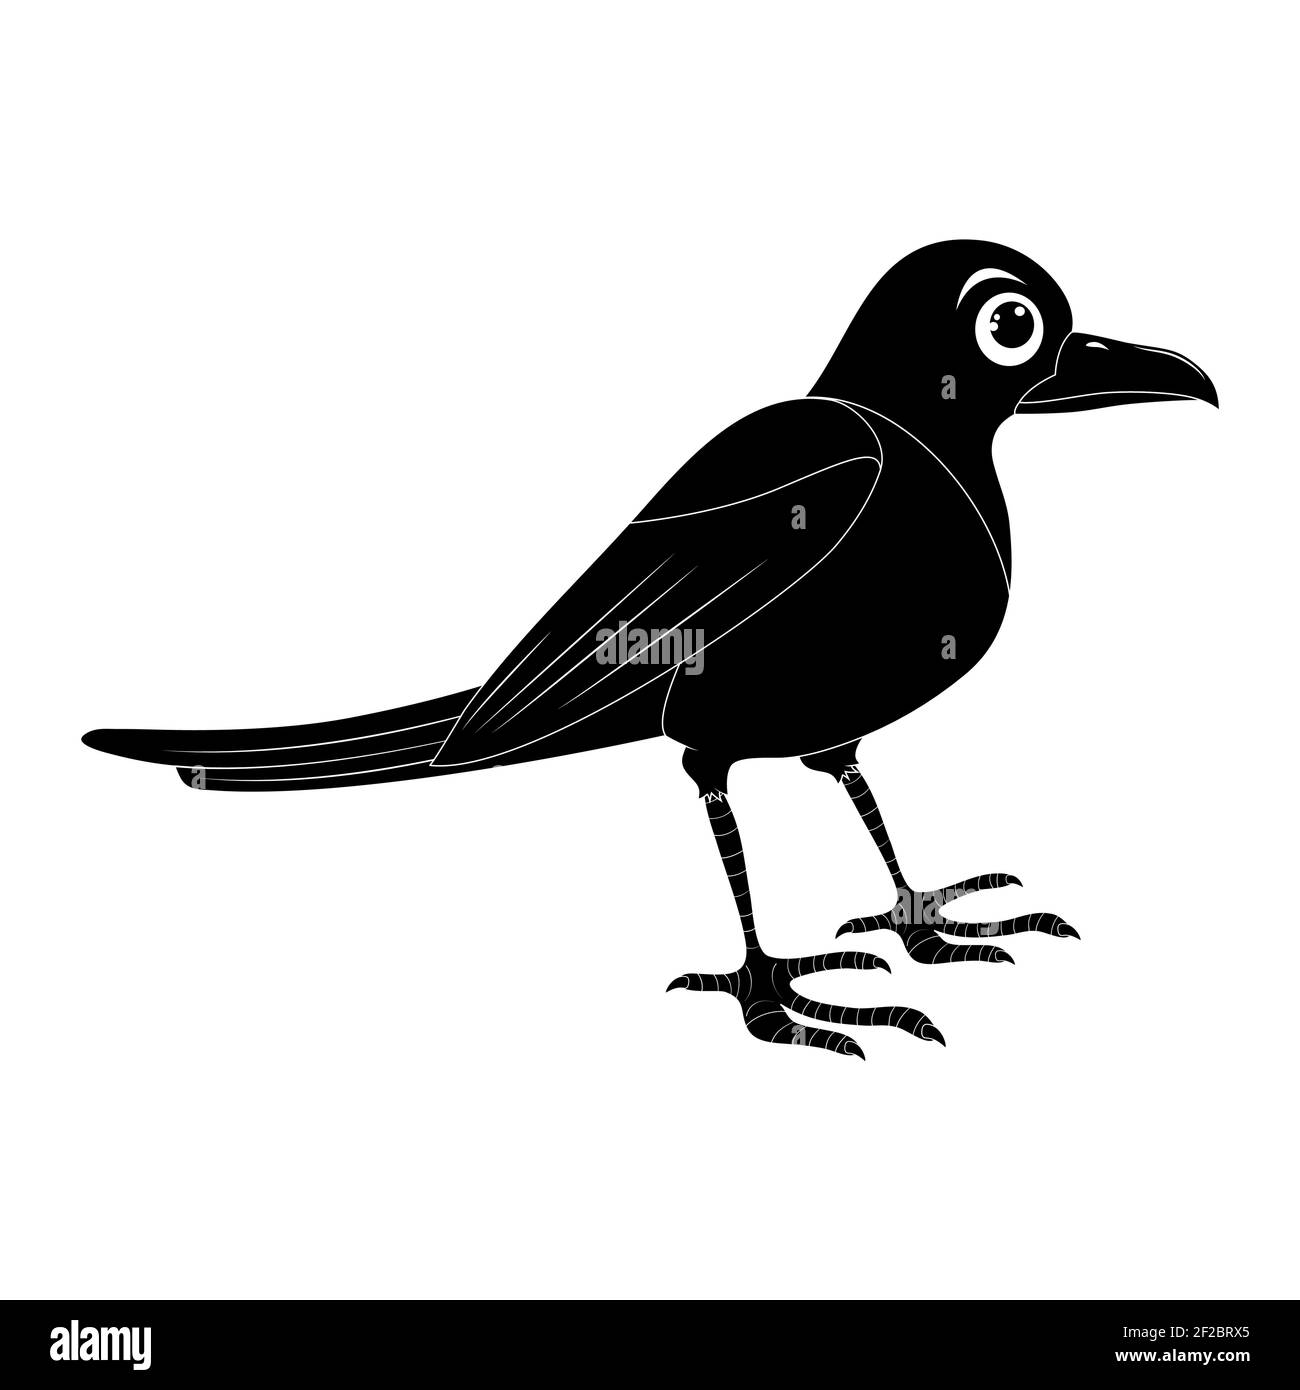 Magpie bird silhouette illustration set . Standing crow animal ornithology design. Vector shape isolated on white background. Stock Vector